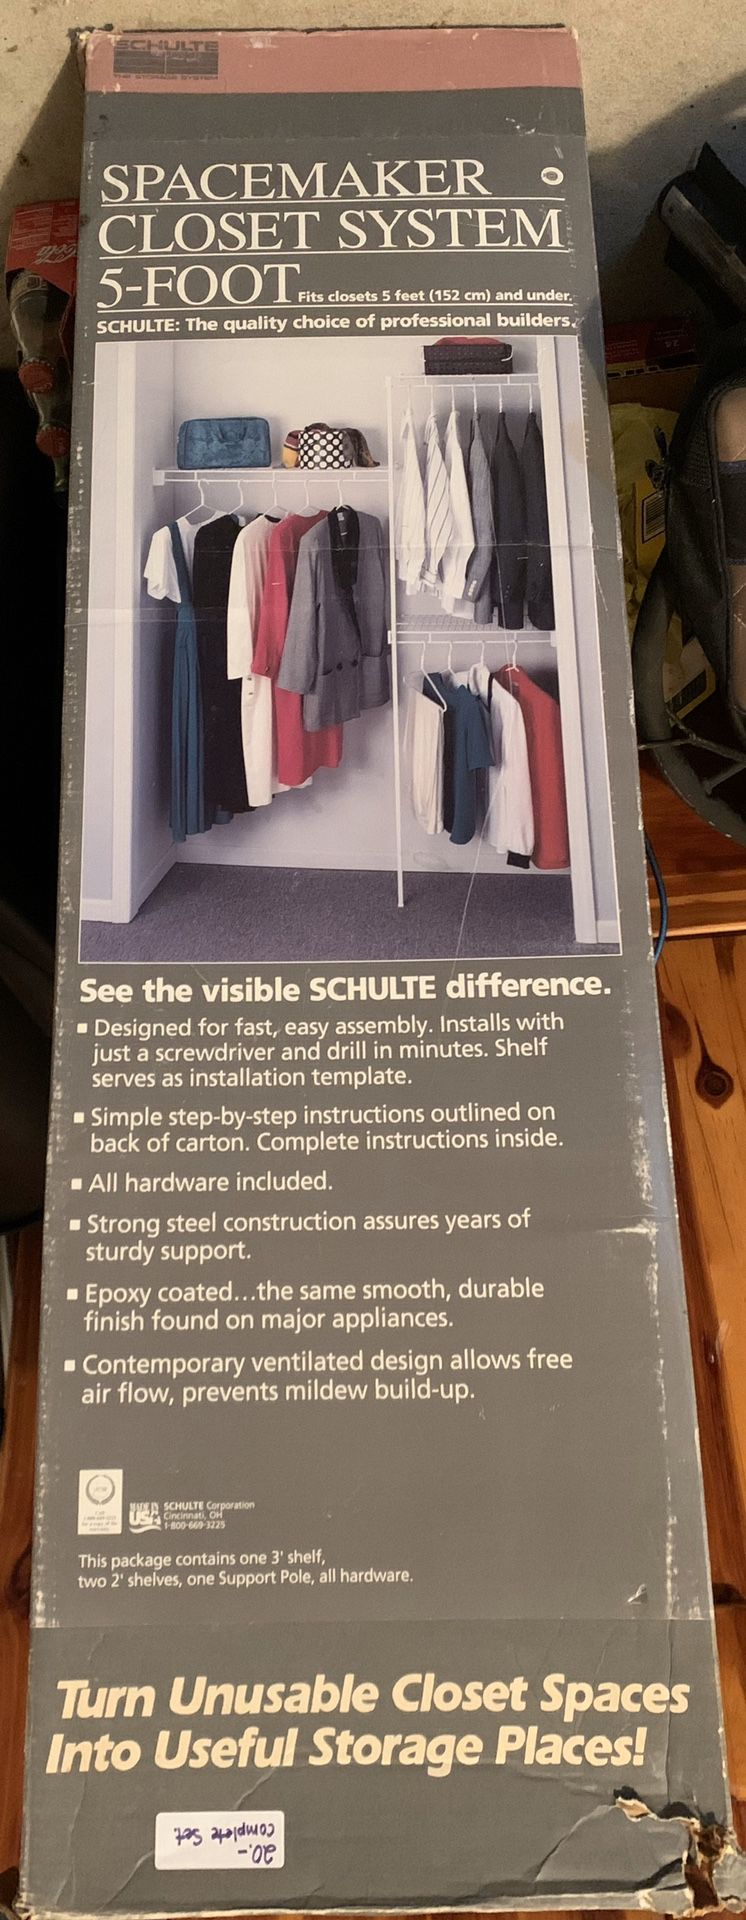 Spacemaker Closet System 5-Foot